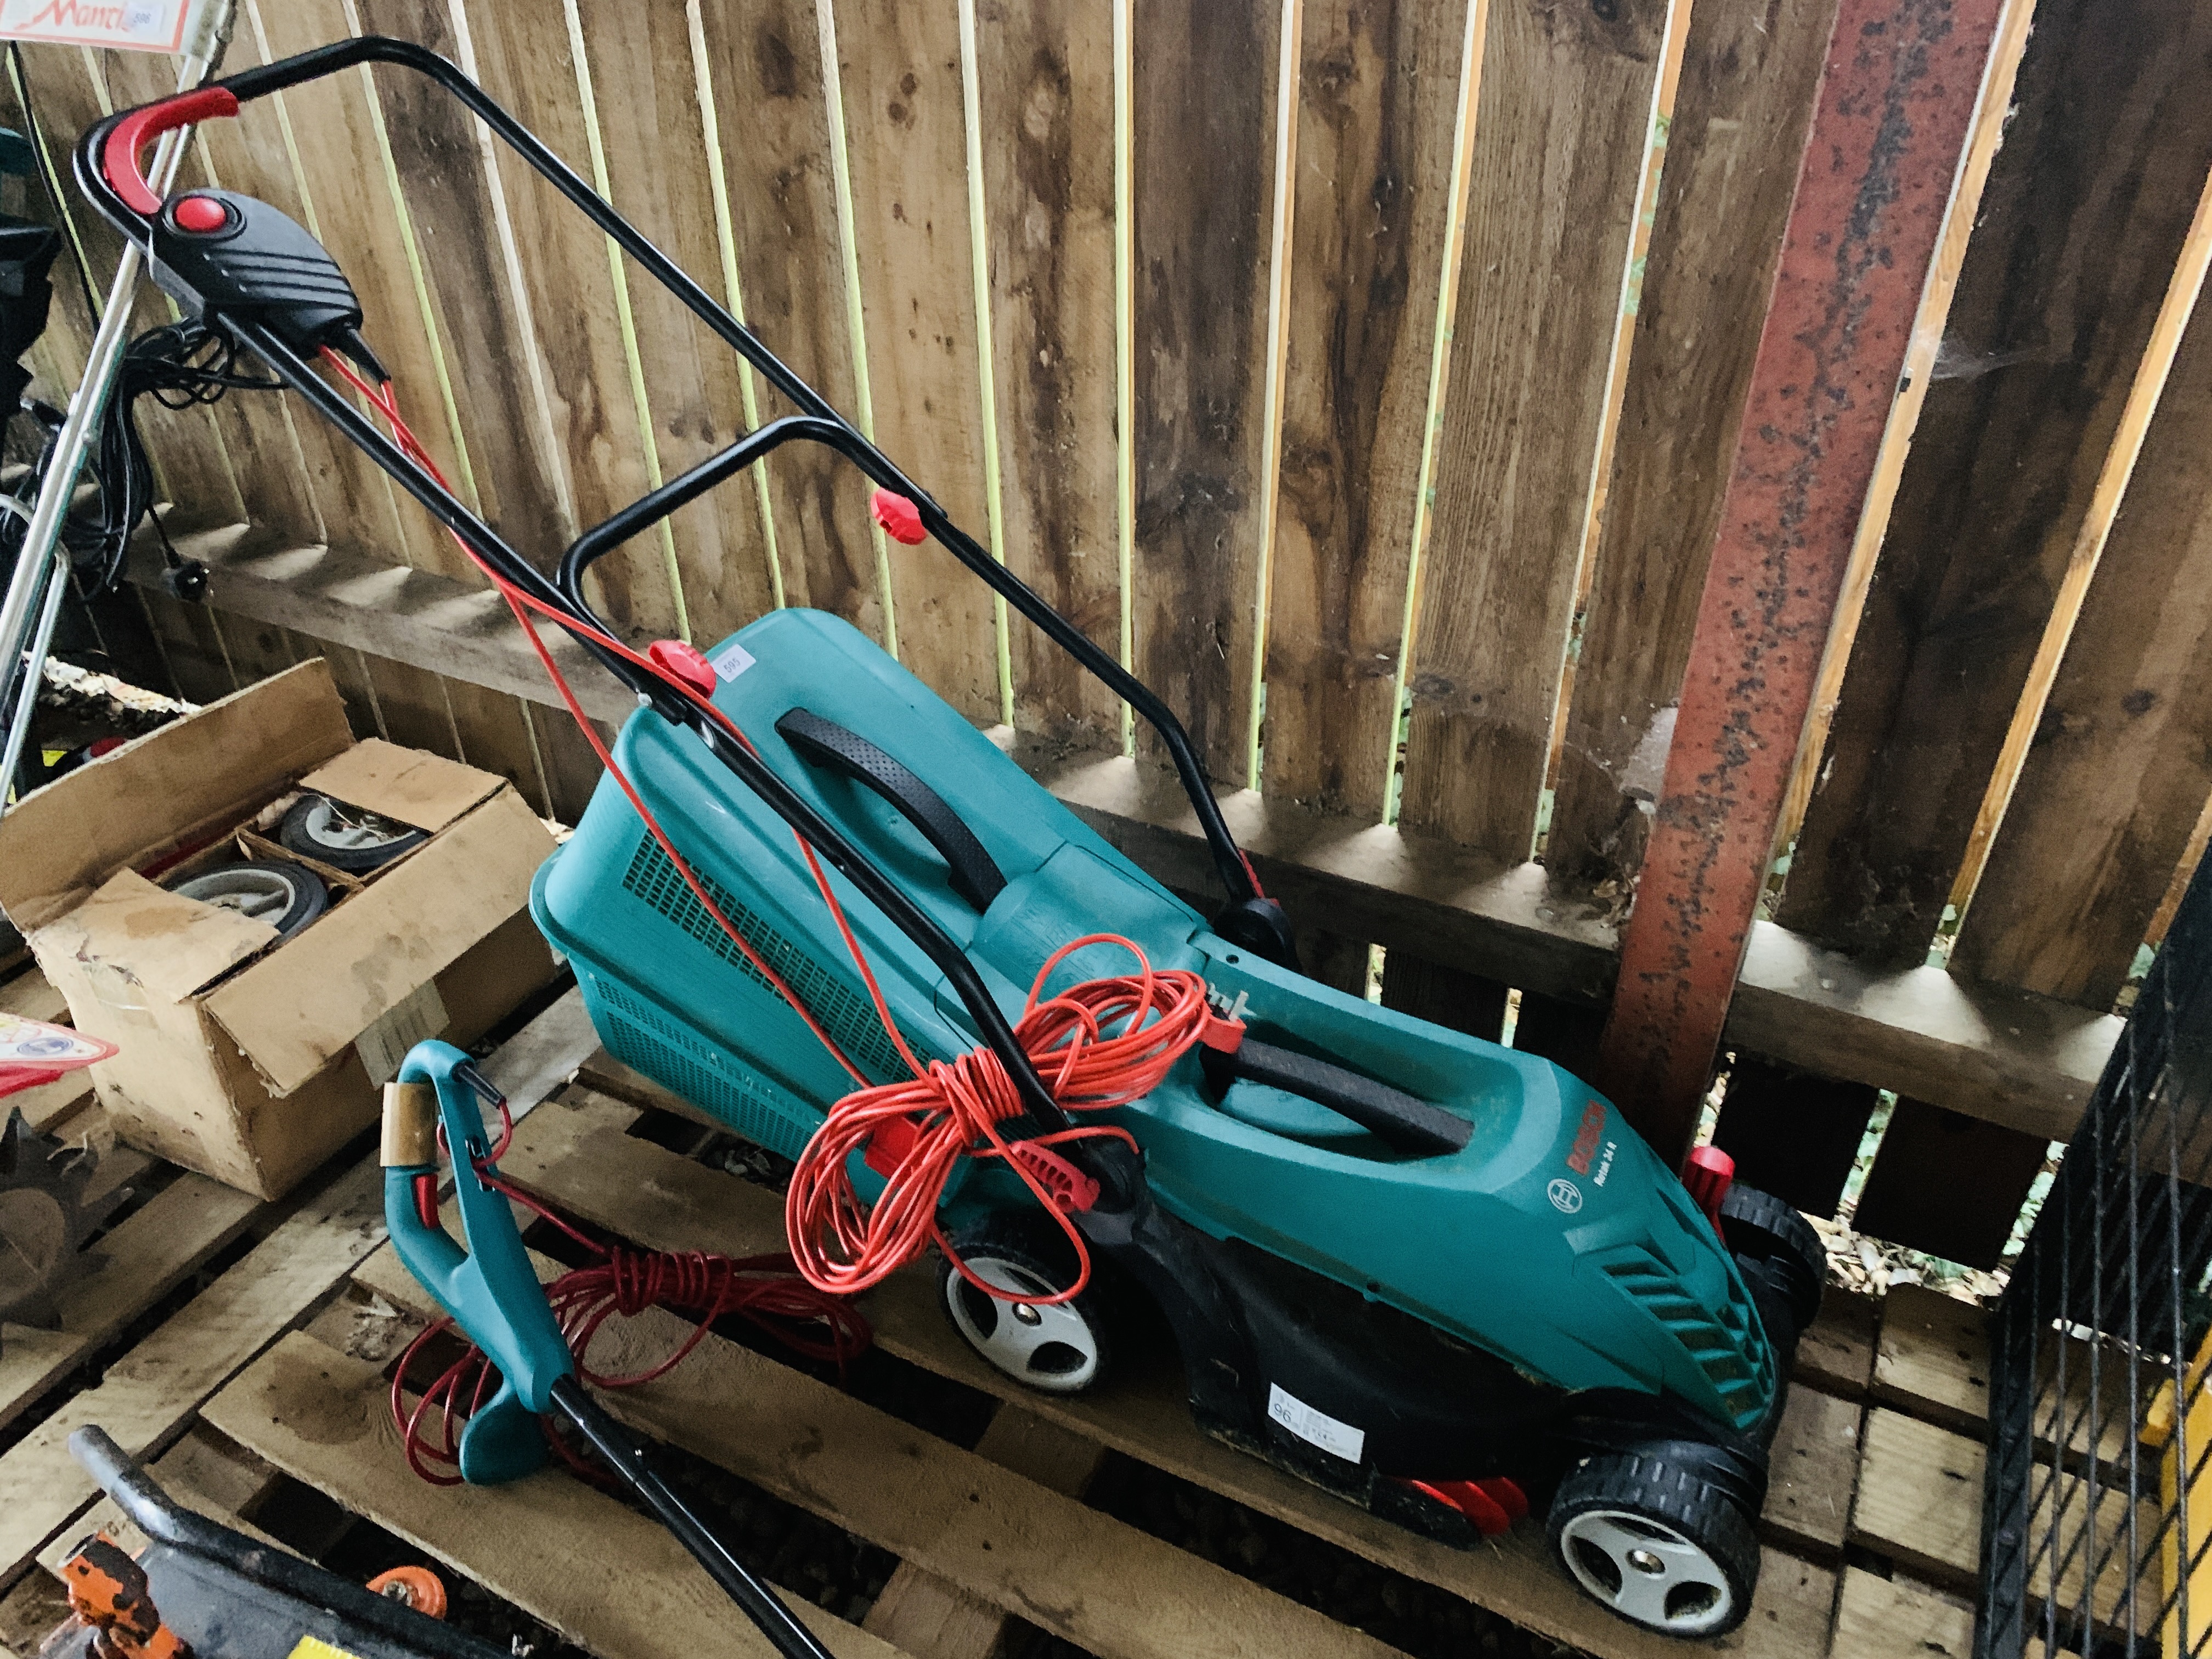 A BOSCH ROTAK 34R ELECTRIC LAWN MOWER AND BOSCH ART 23 SL ELECTRIC STRIMMER - SOLD AS SEEN